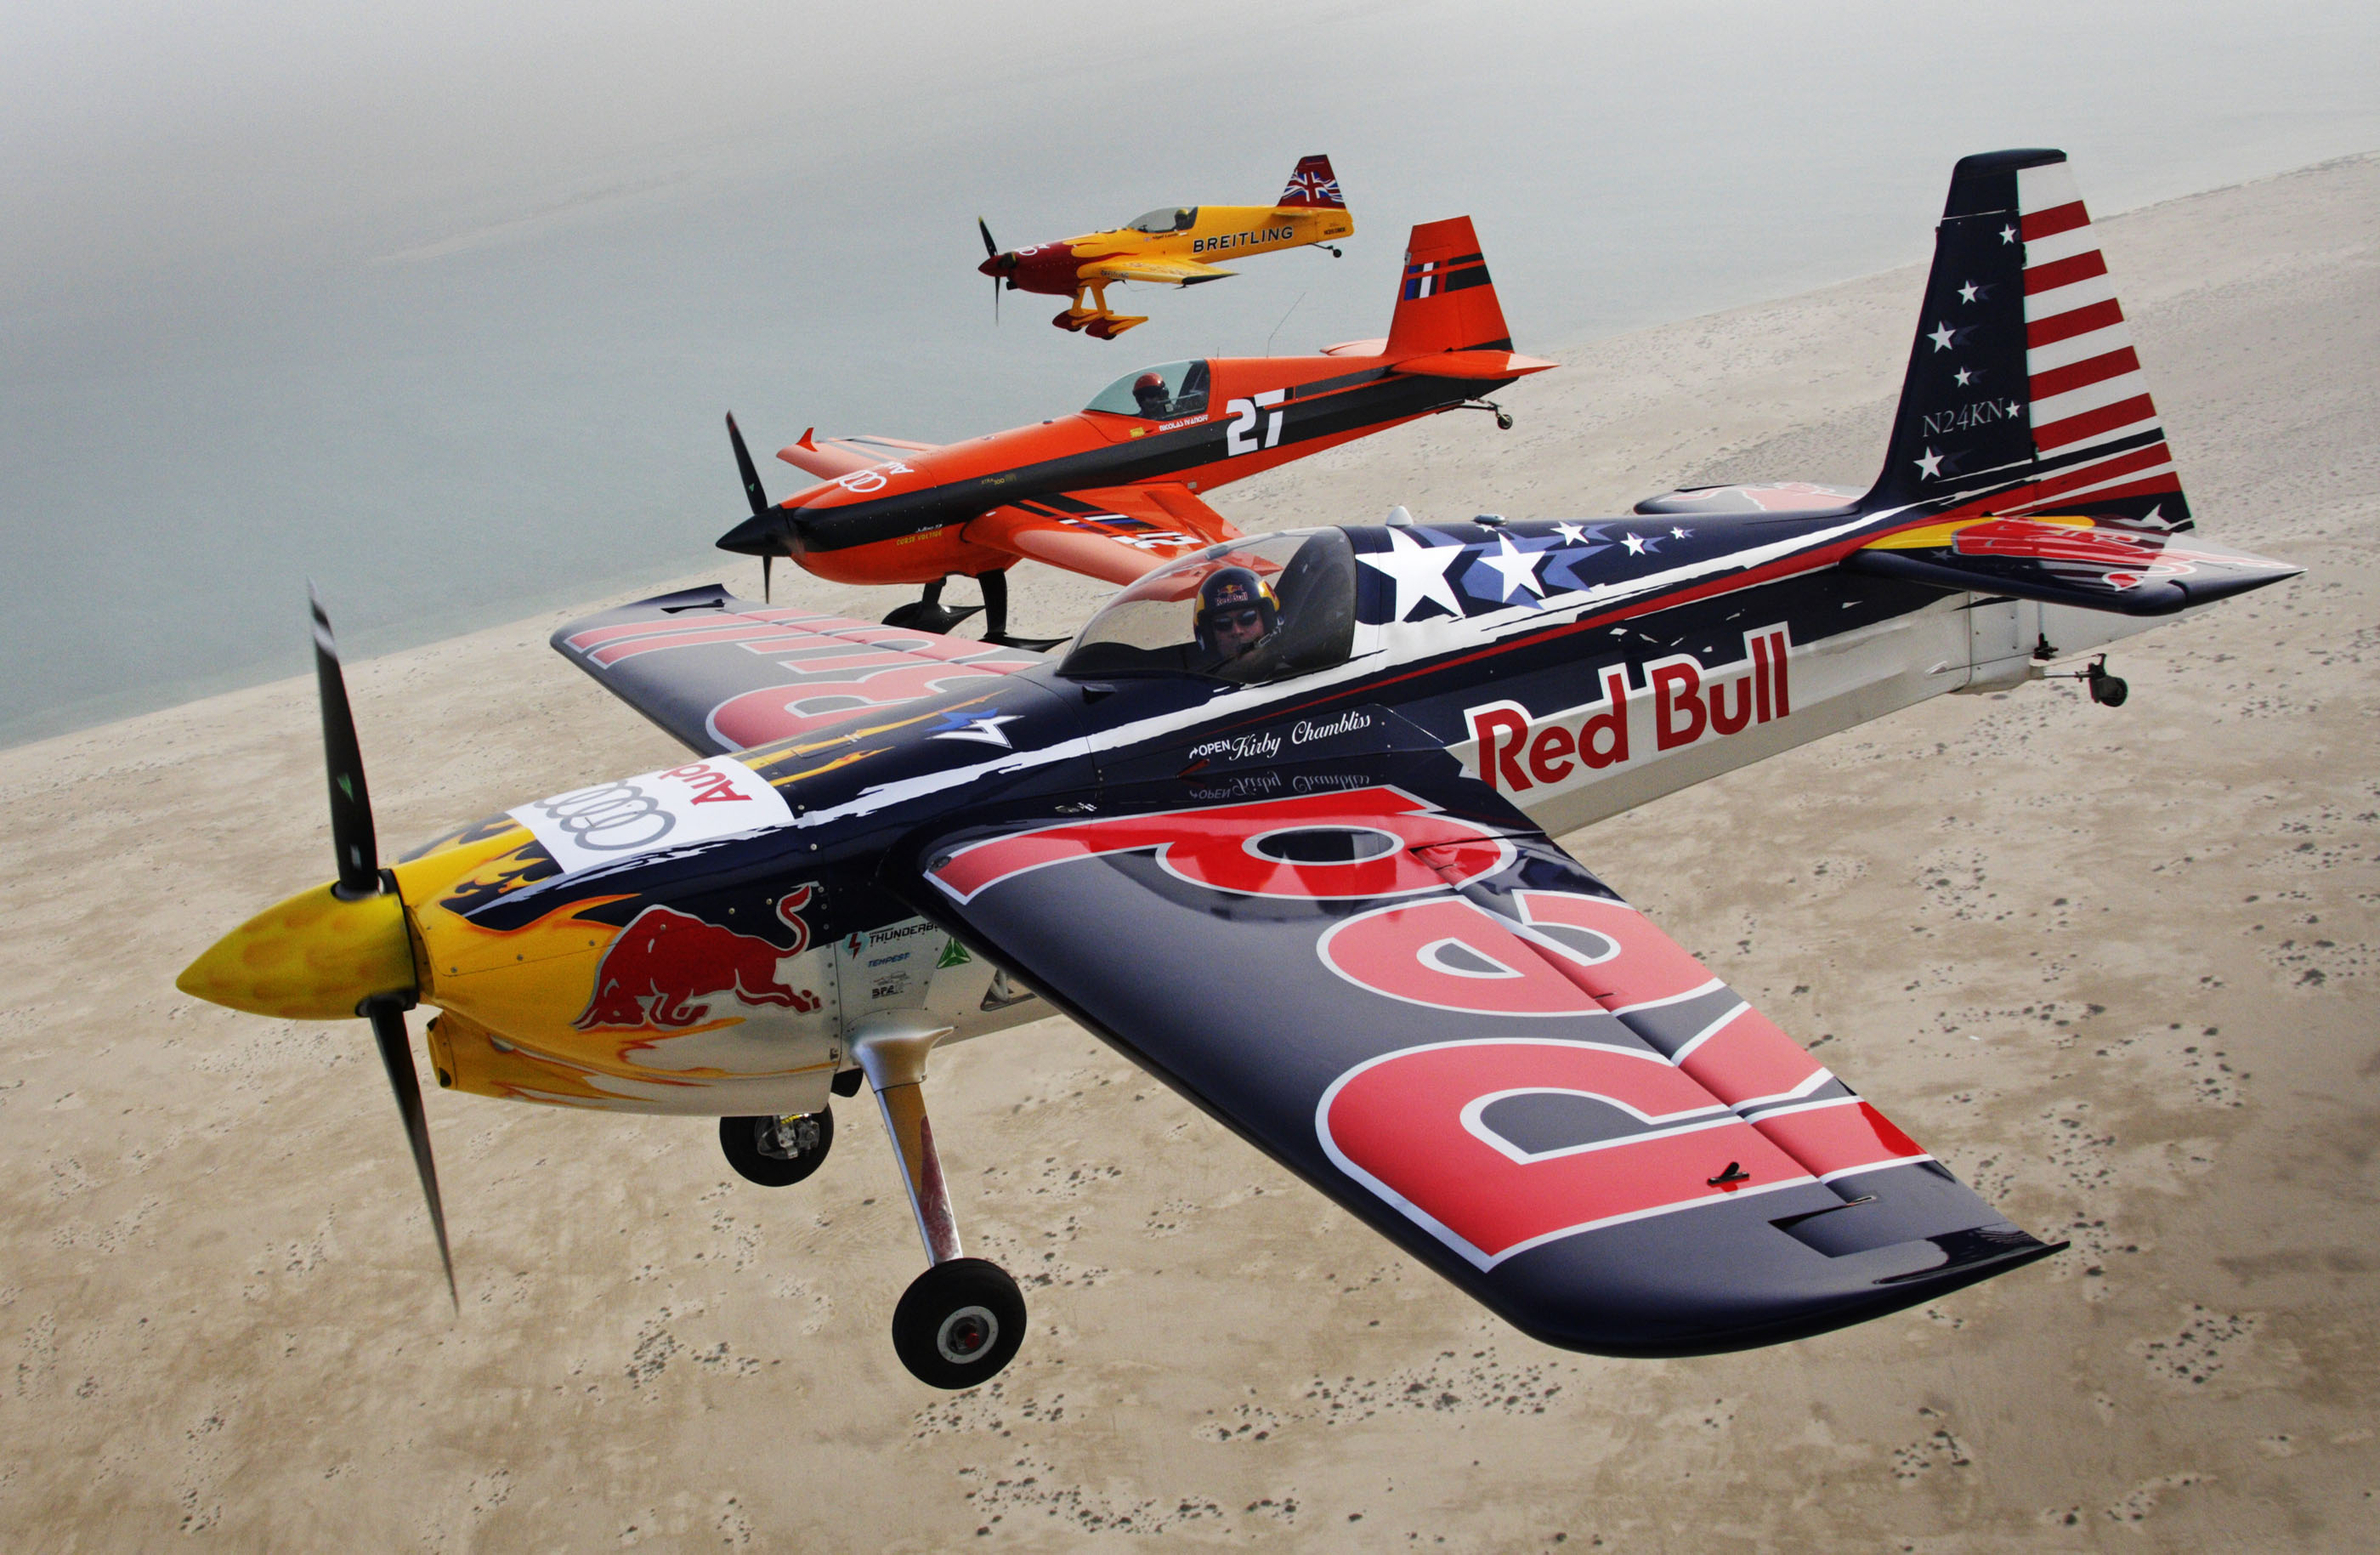 red-bull-air-race-airplane-plane-race-racing-red-bull-aircraft